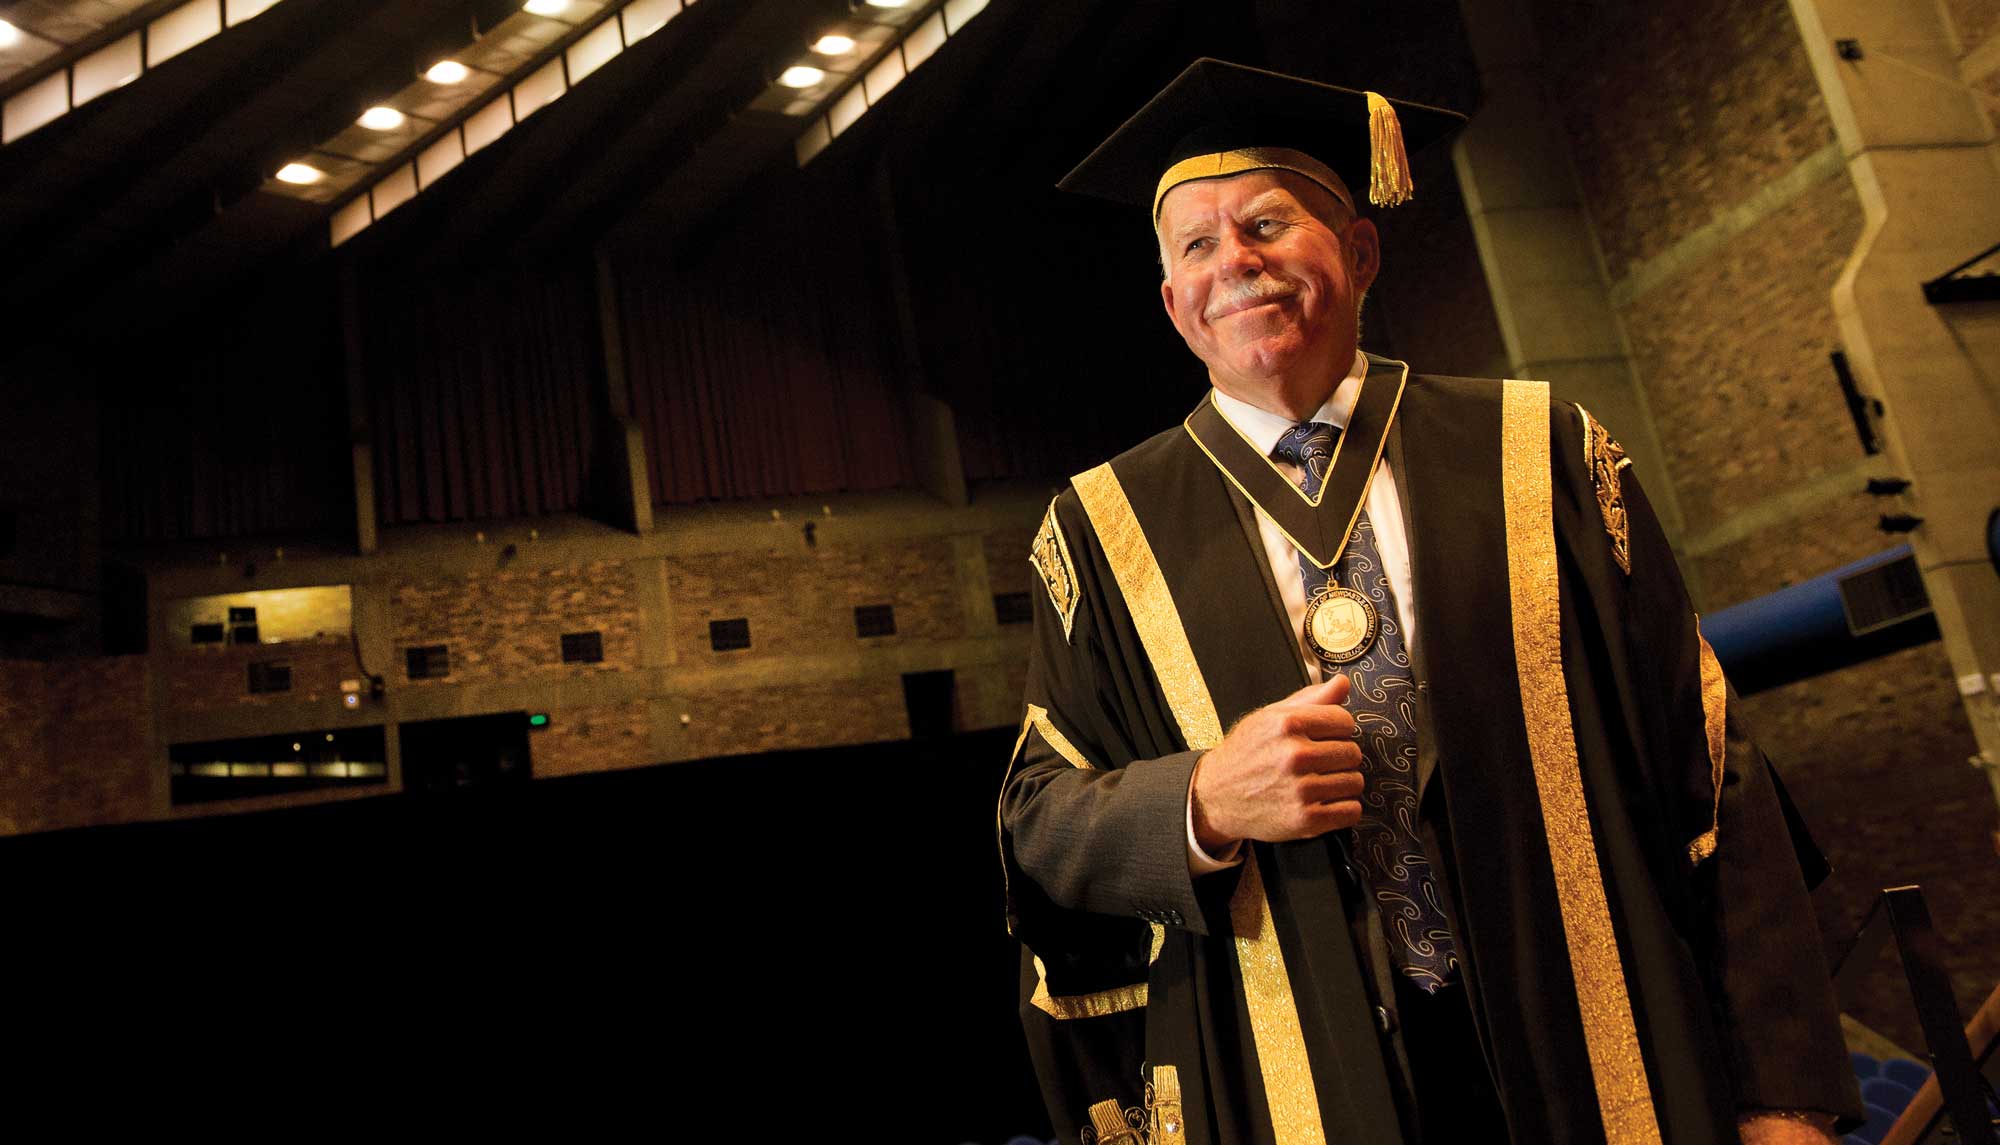 Man in ceremonial graduation robes, smiling in a large and dark brick building